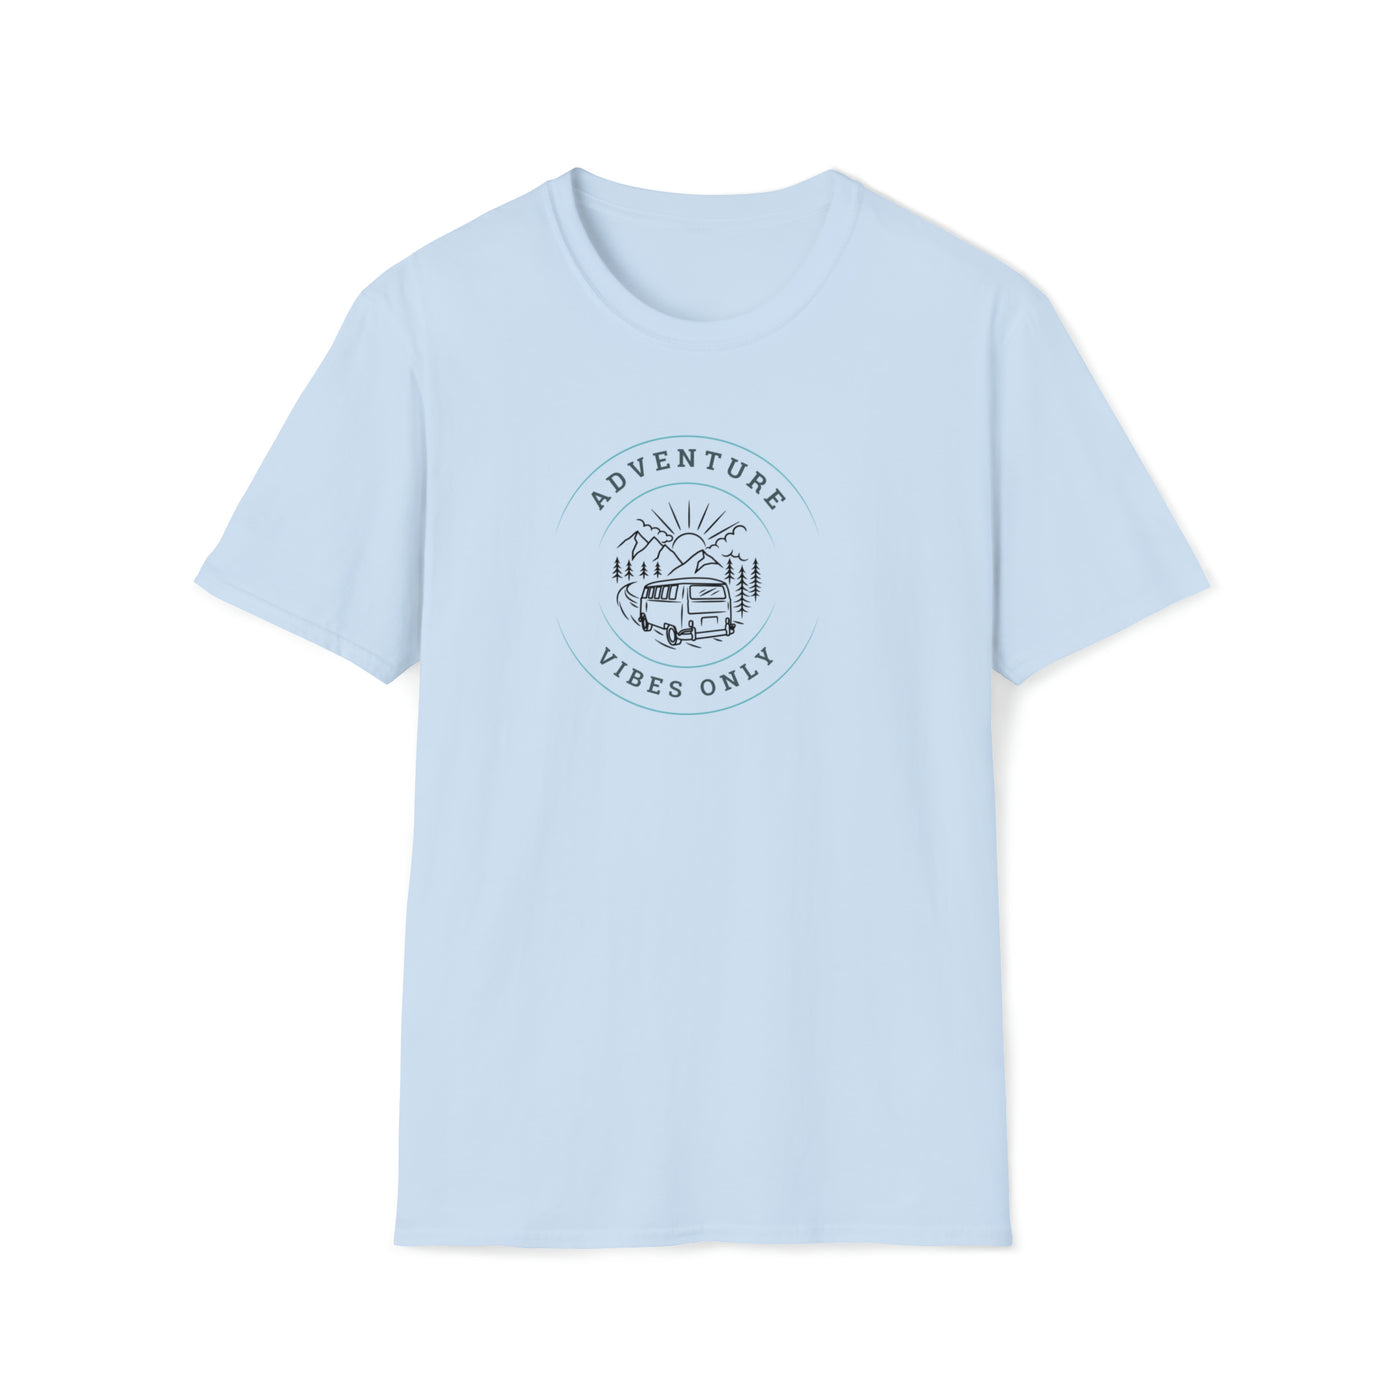 Round Neck T Shirts | Crew Neck T Shirts | Let's Travel